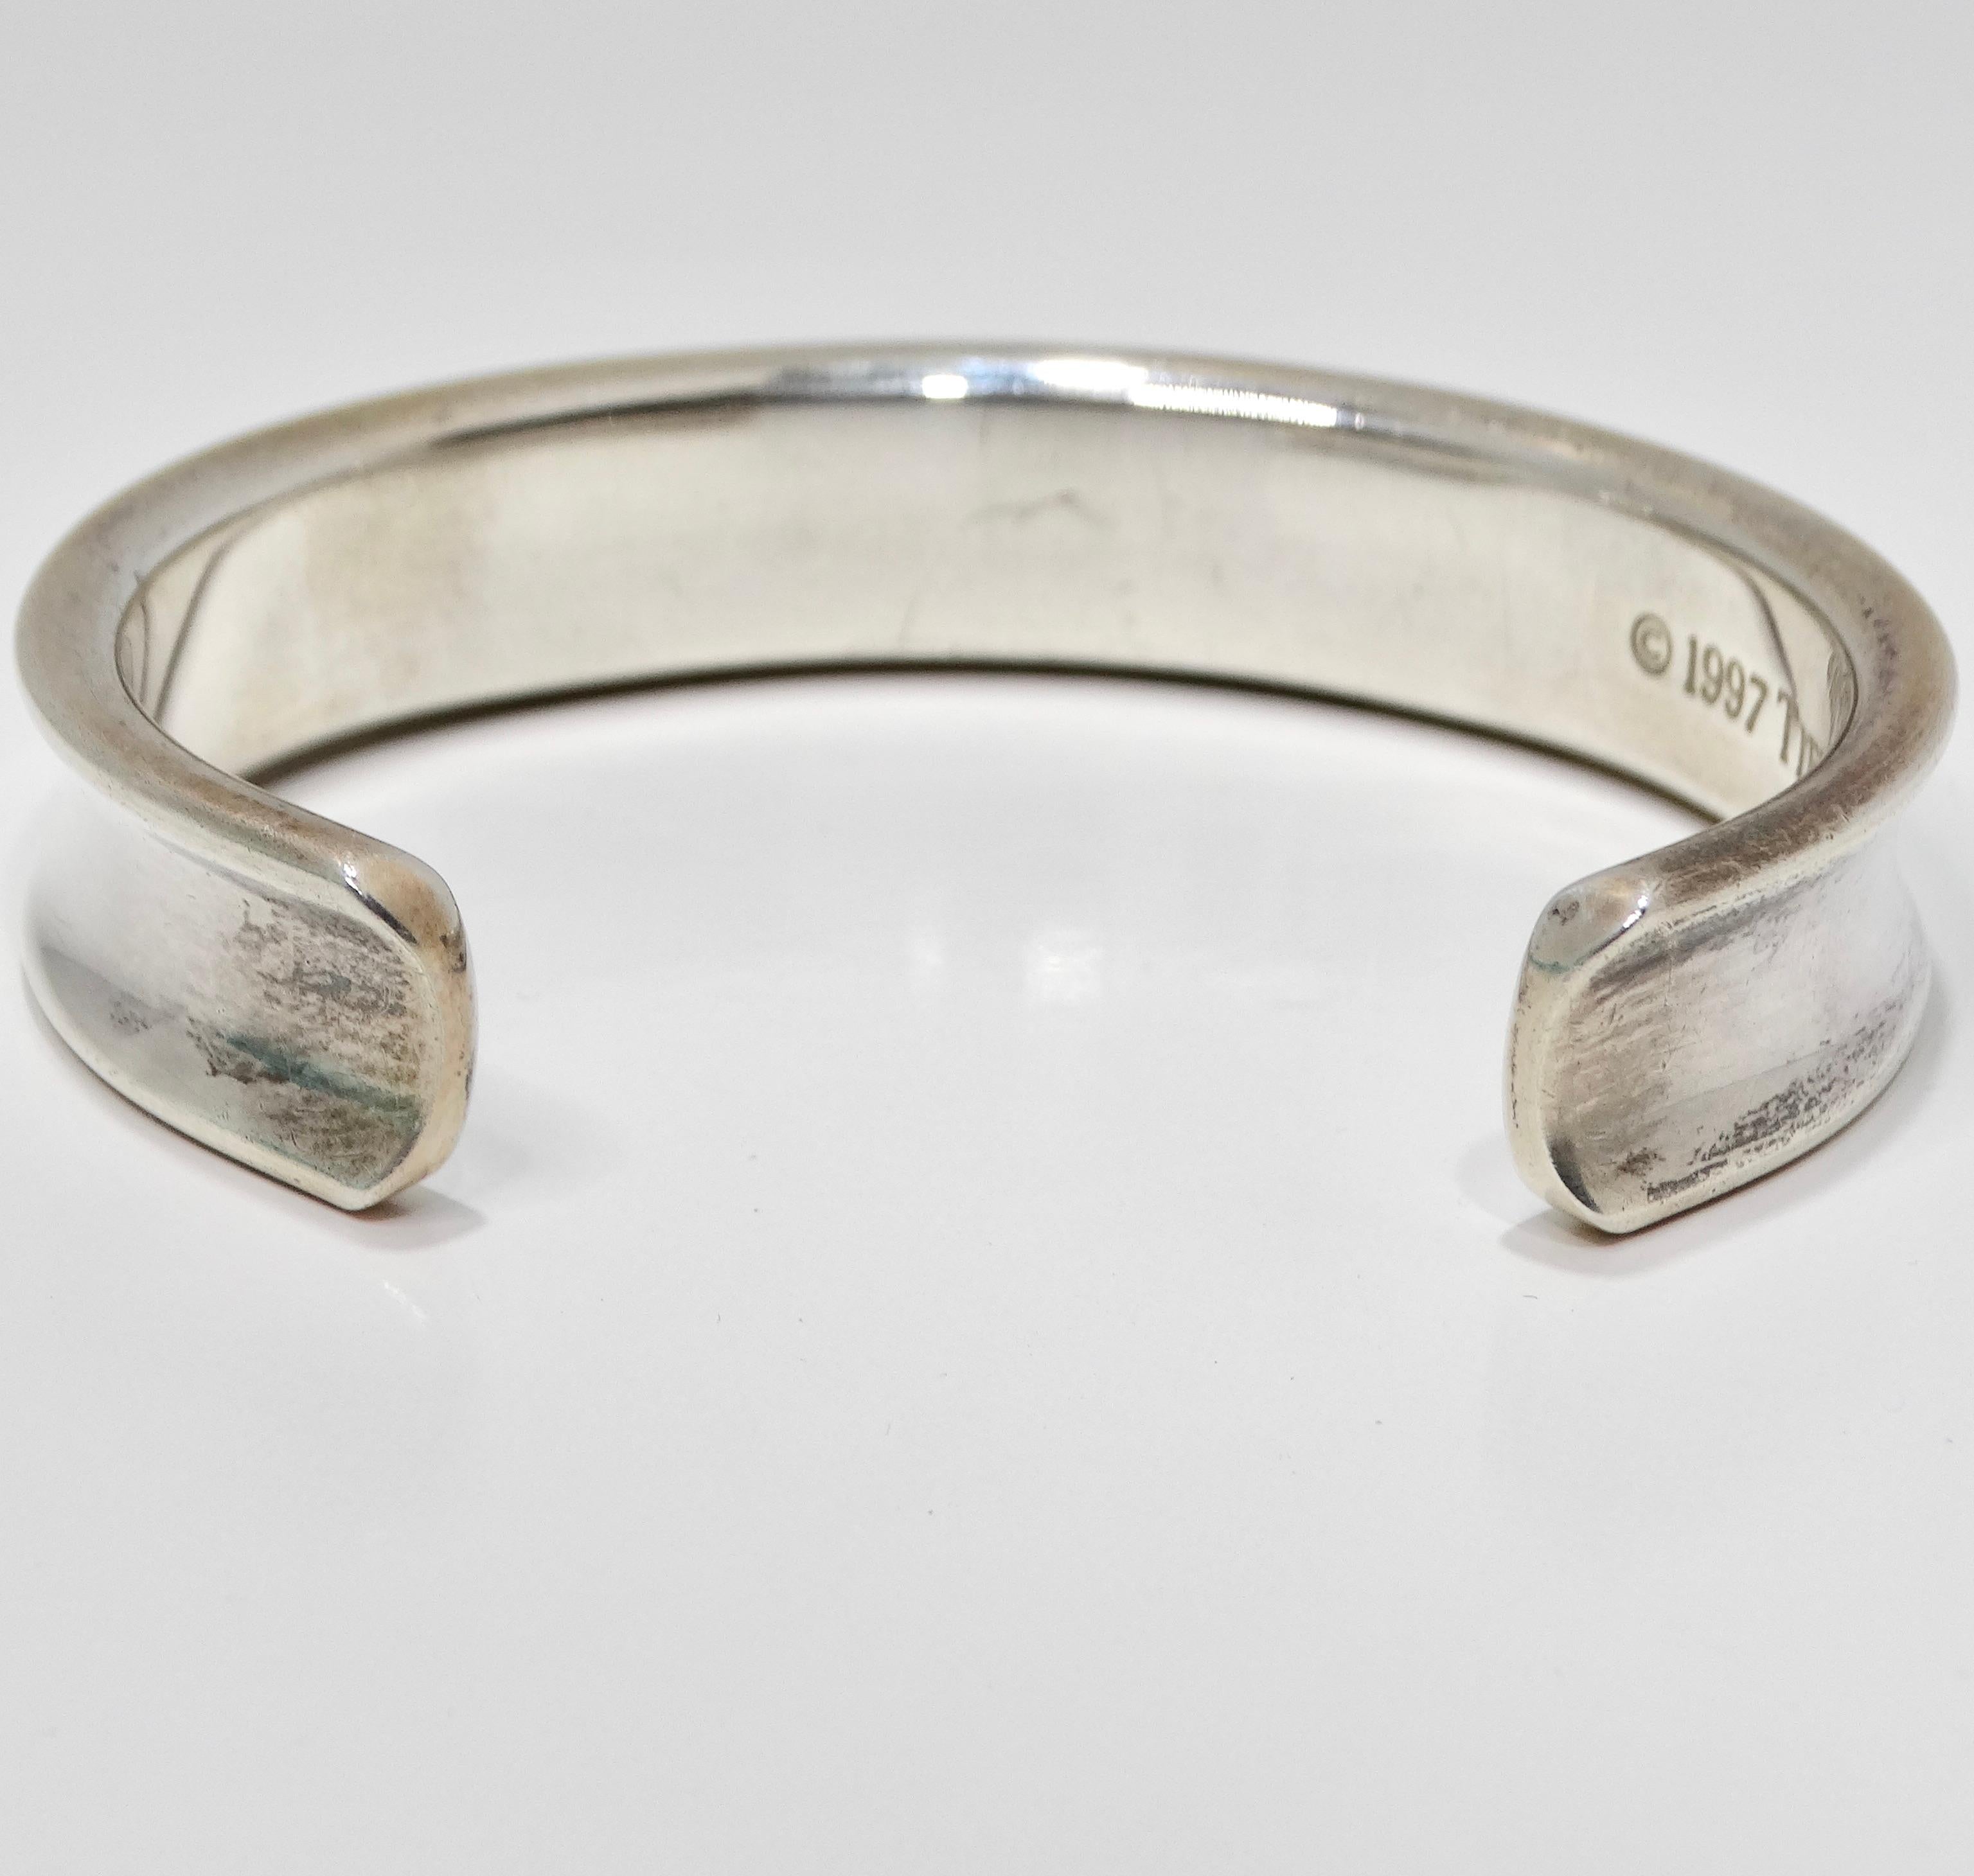 Tiffany & Co 1997 Silver 1925 Engraved Cuff Bracelet For Sale 2